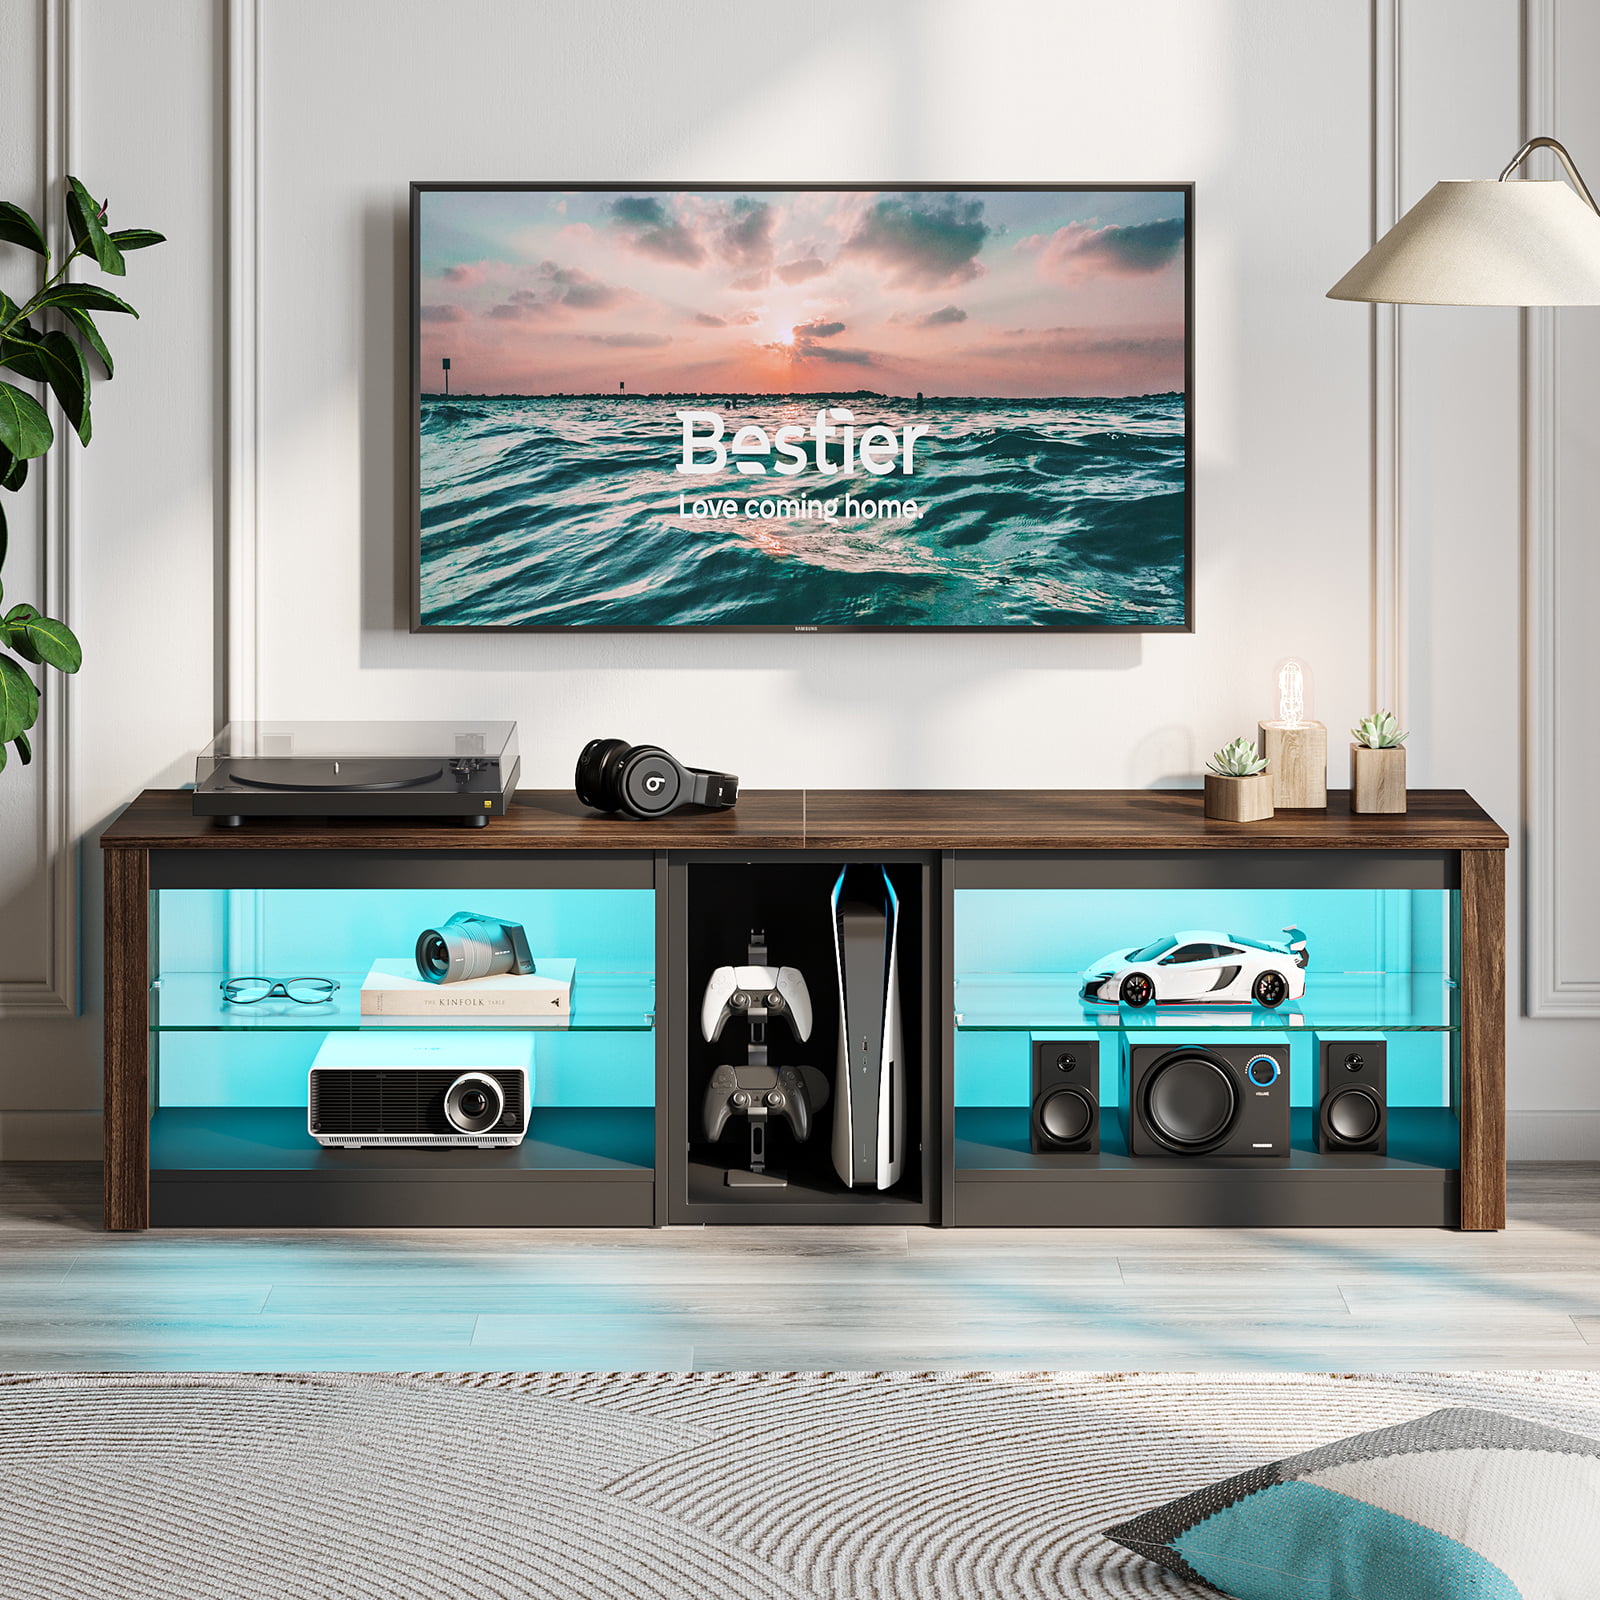 Bestier TV Stand for TVs up to 70” with RGB LED Lights